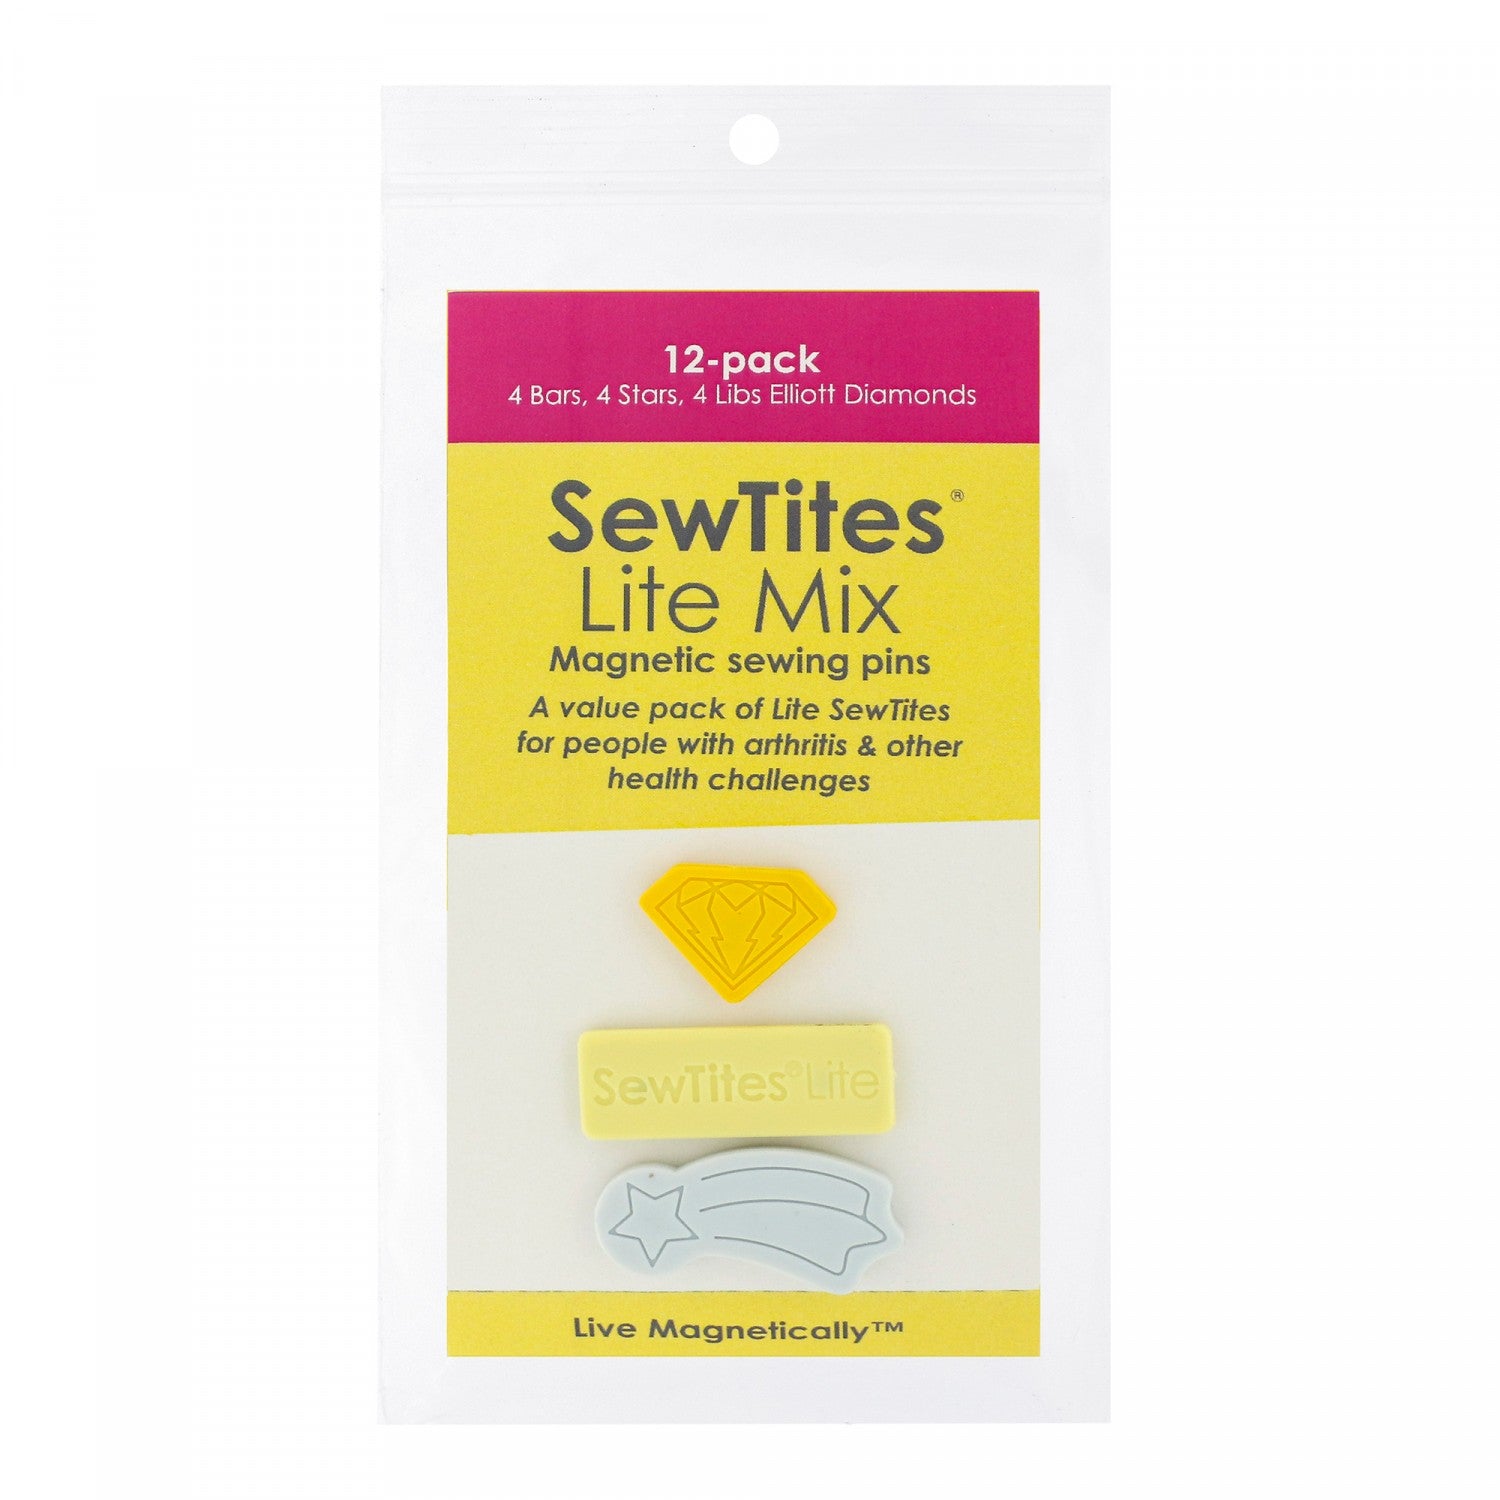 The SewTites Lite Mix packs contain a combination of our new Lite models for people with arthritis and other health challenges – the Libs Elliott Diamond, Lite Star, and Lite Bar.  The 12-pack is a great value pack for those who know they'll use all the SewTites.